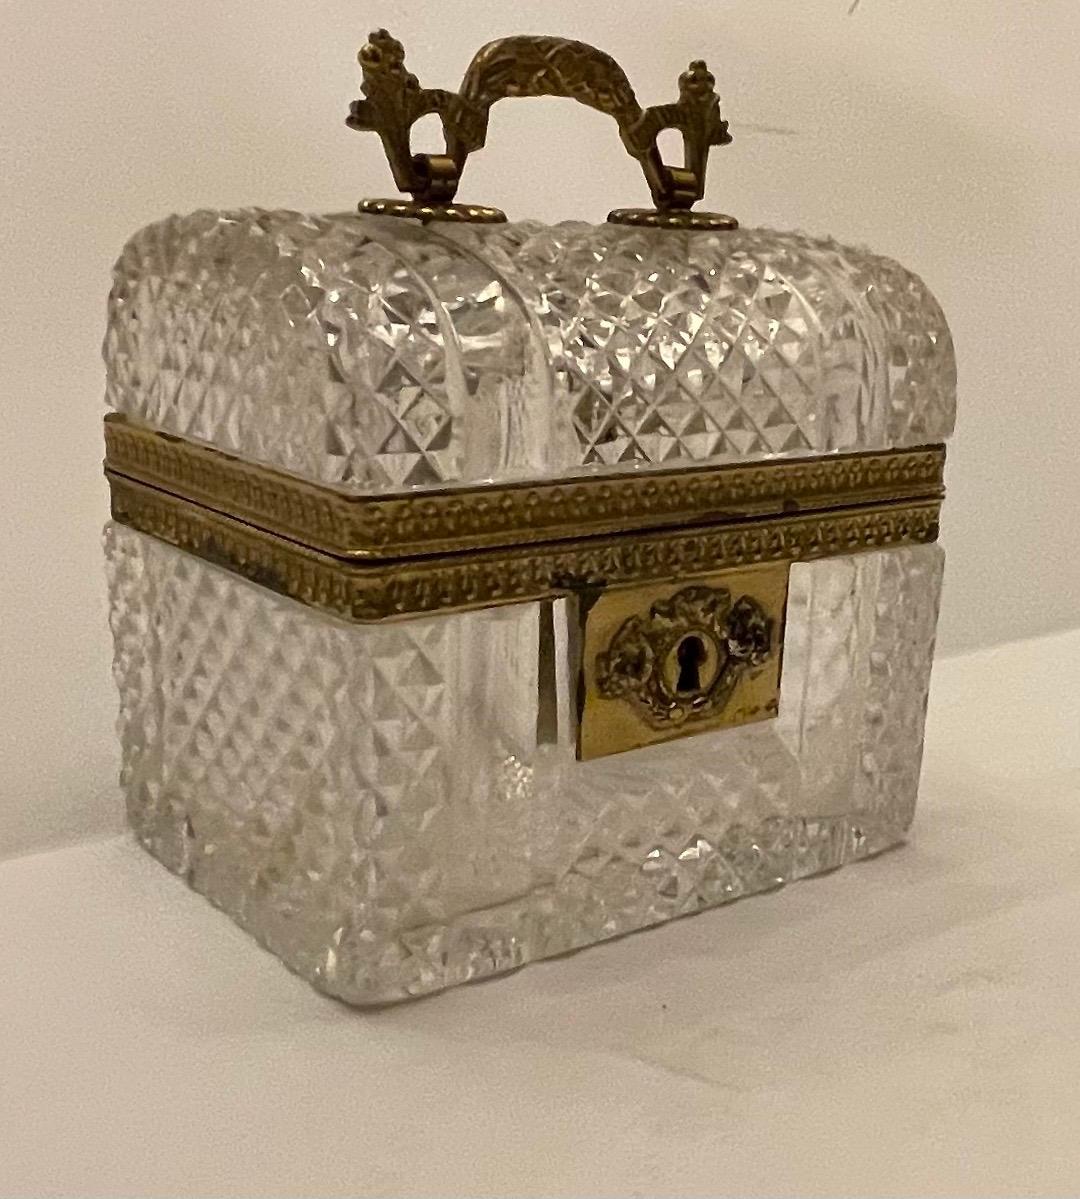 A Wonderful French bronze ormolu mounted and faceted cut crystal baccarat casket / jewelry box with domed top with handle.